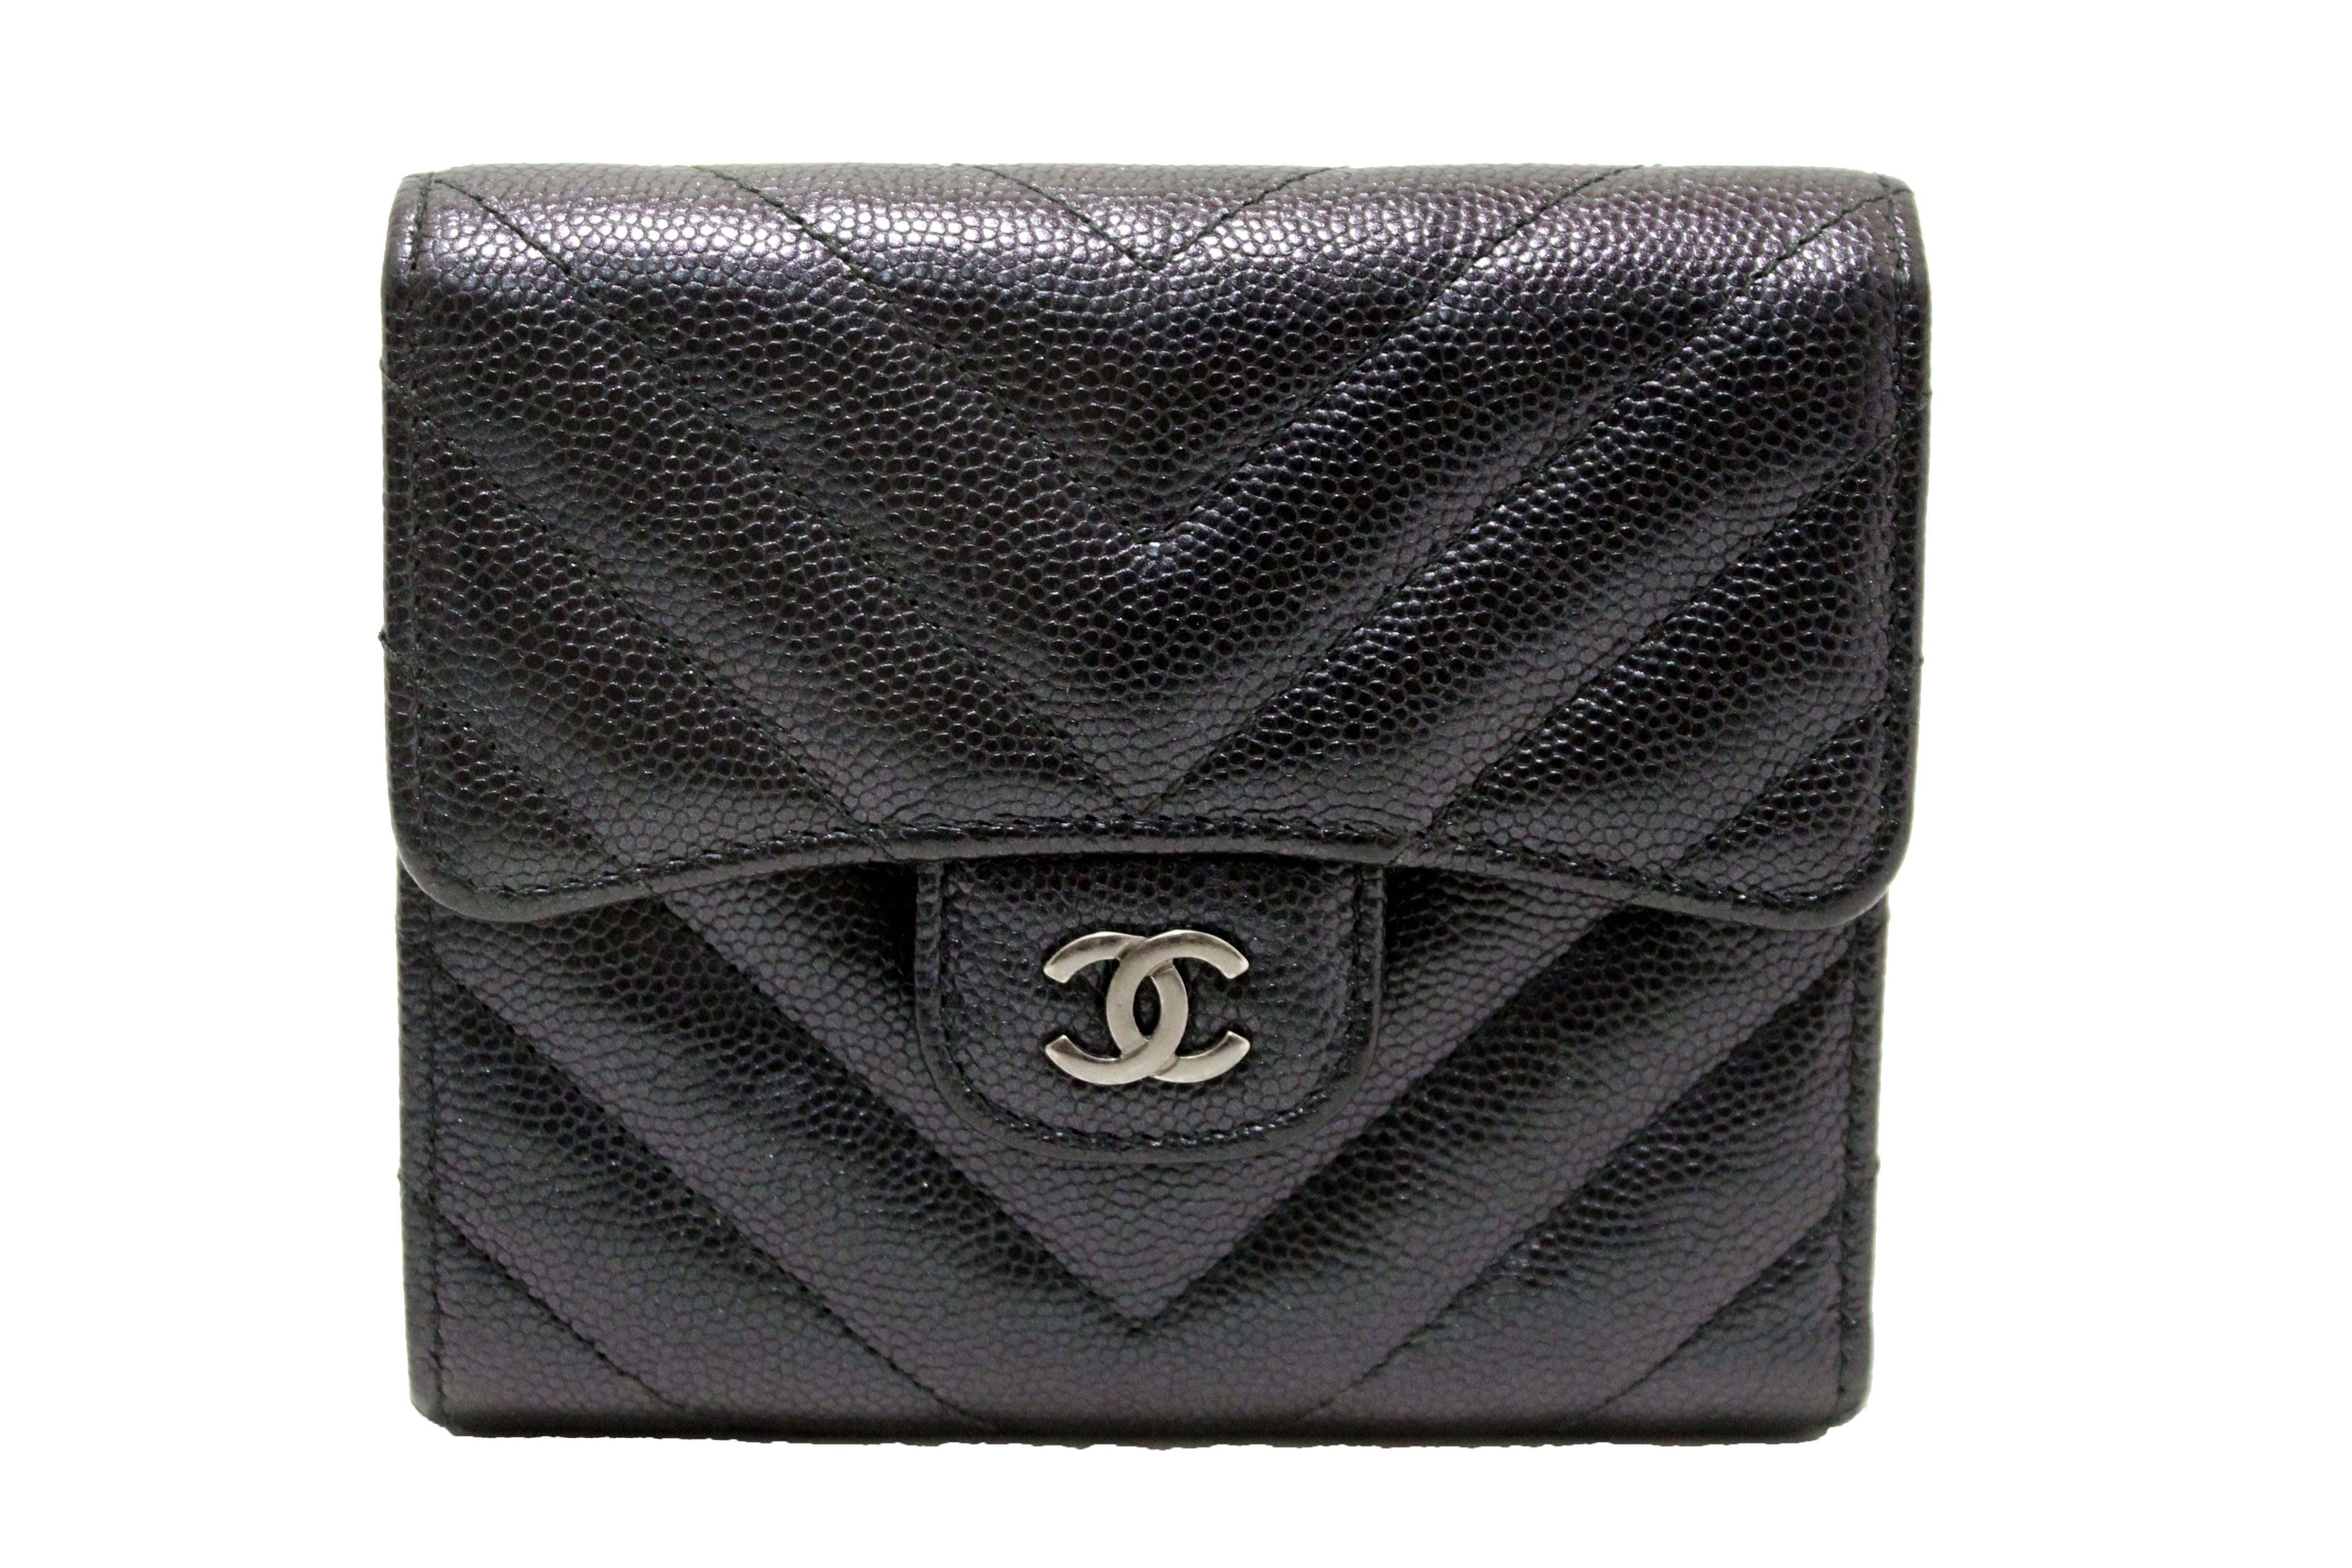 Authentic Chanel Black Iridescent Caviar Chevron Quilted Compact